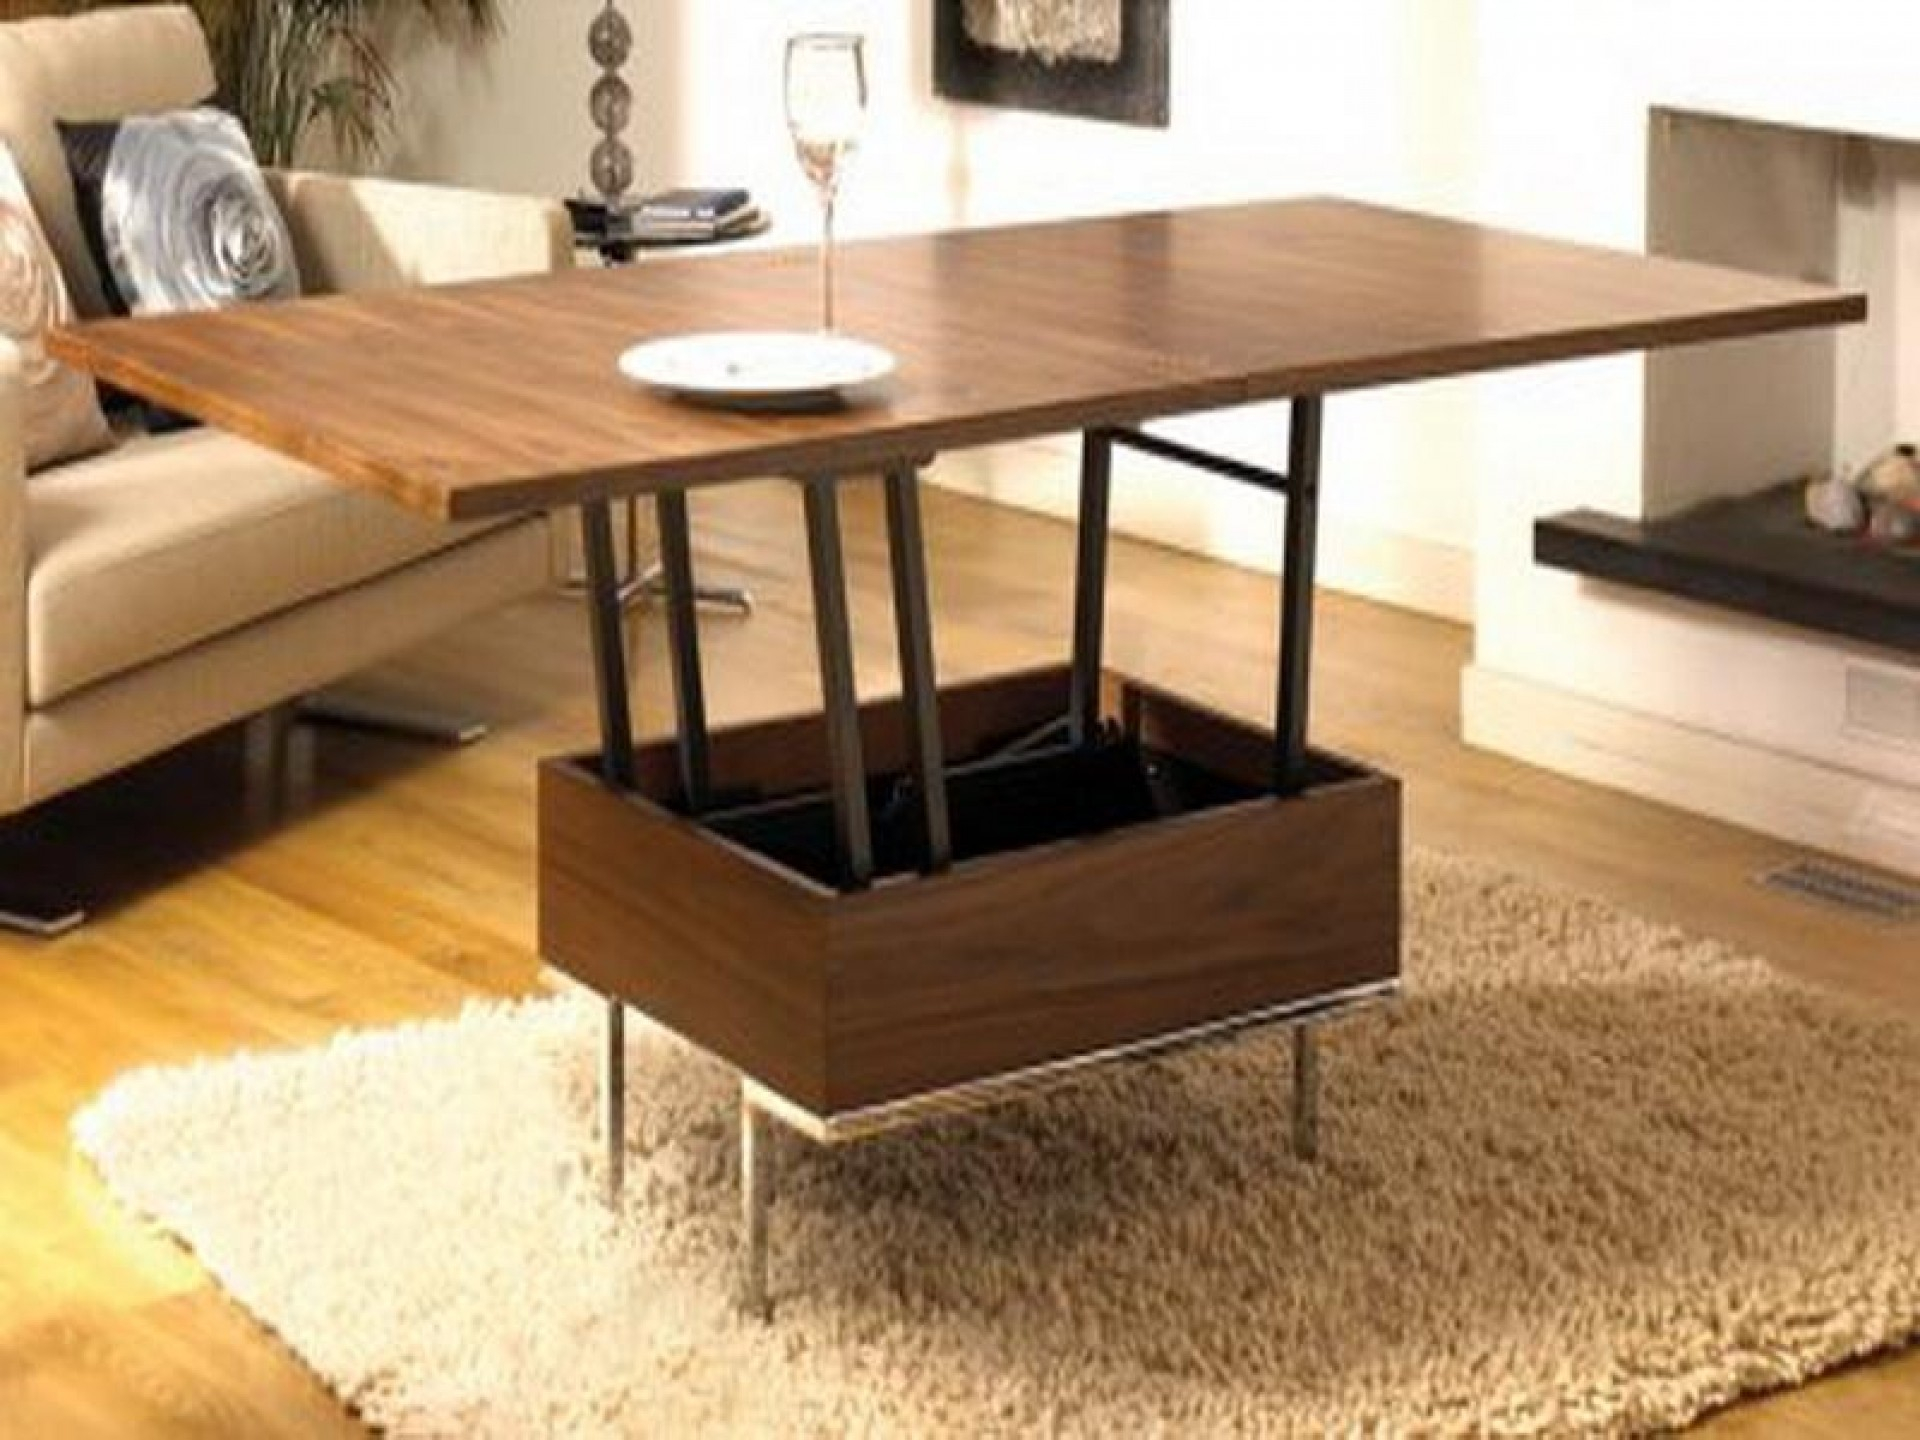 Adjustable Height Coffee Dining Table Image Collections with dimensions 1920 X 1440